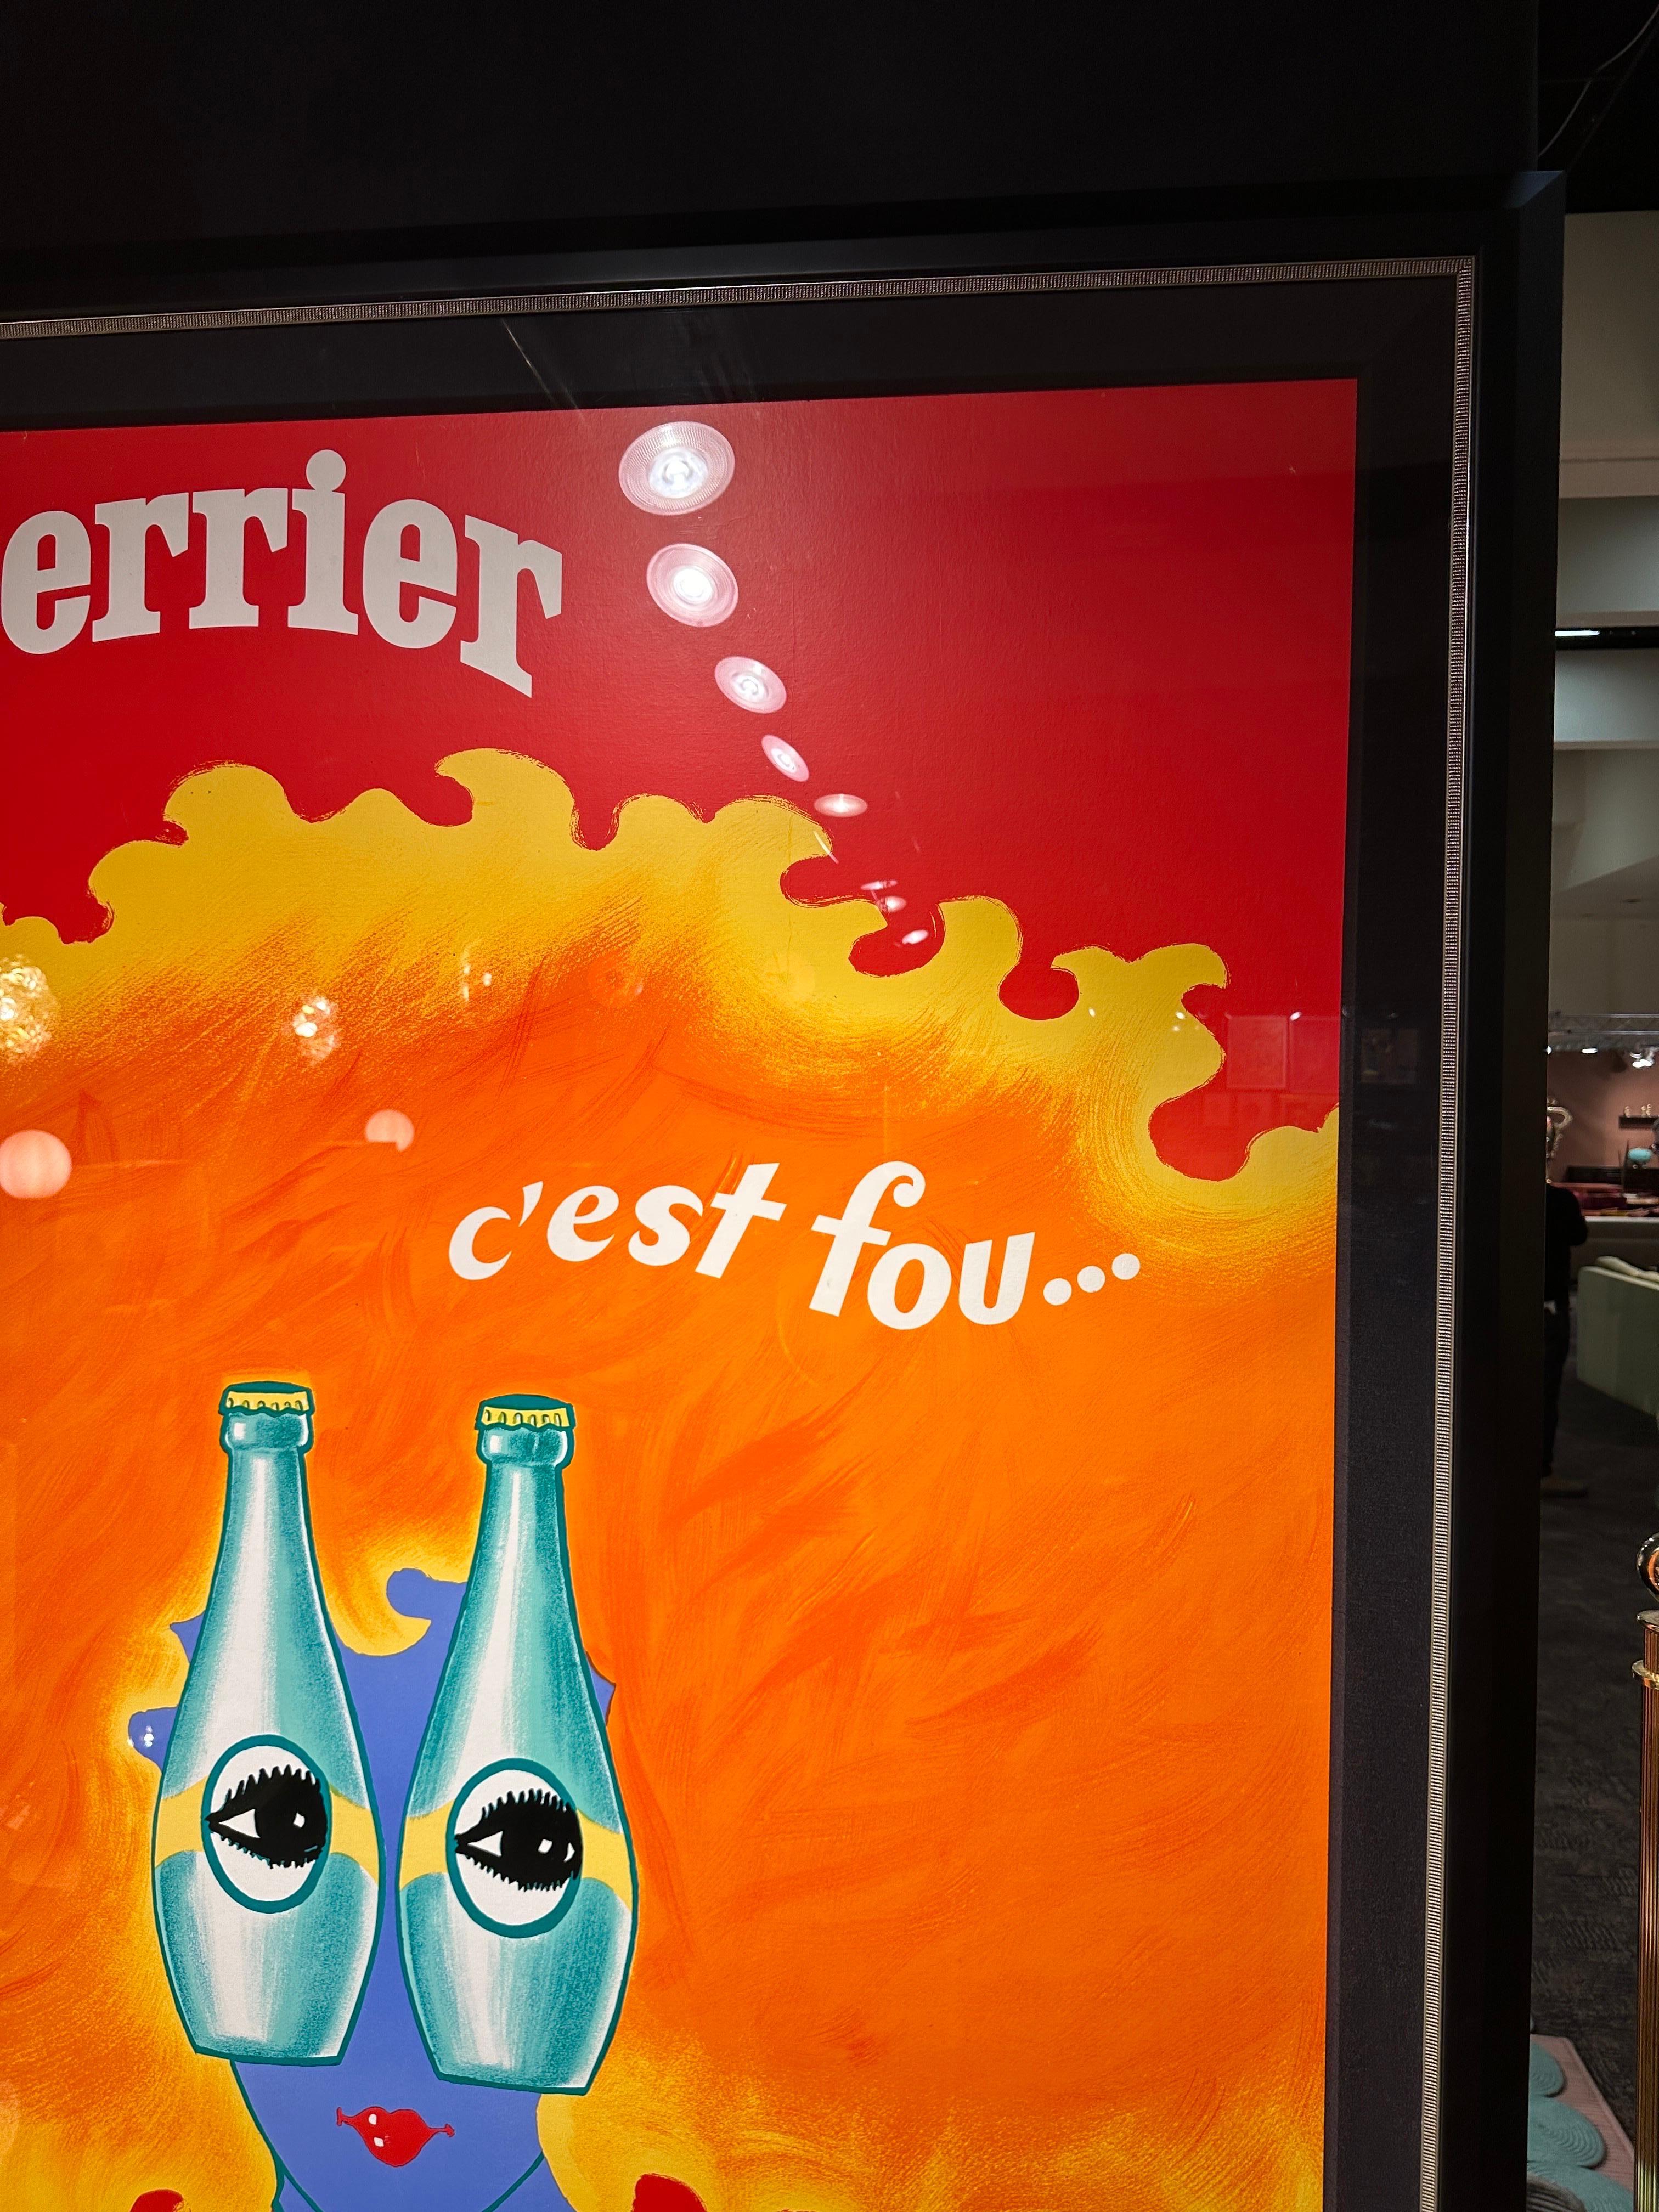 Rare “Perrier” Poster by Bernard Villemot In Good Condition For Sale In North Hollywood, CA